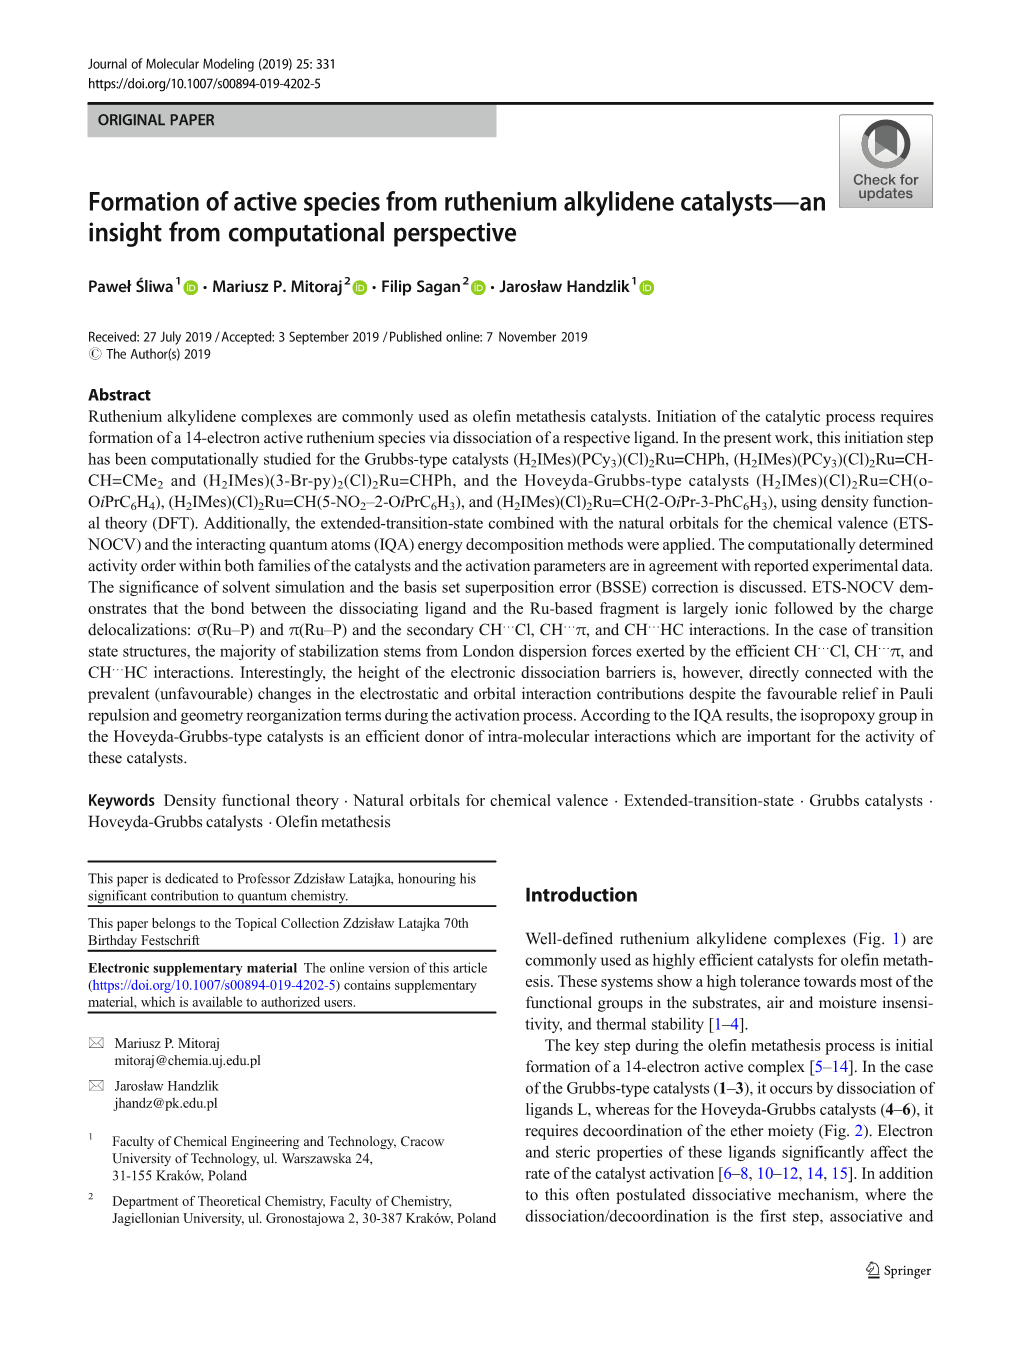 Formation of Active Species from Ruthenium Alkylidene Catalysts-An